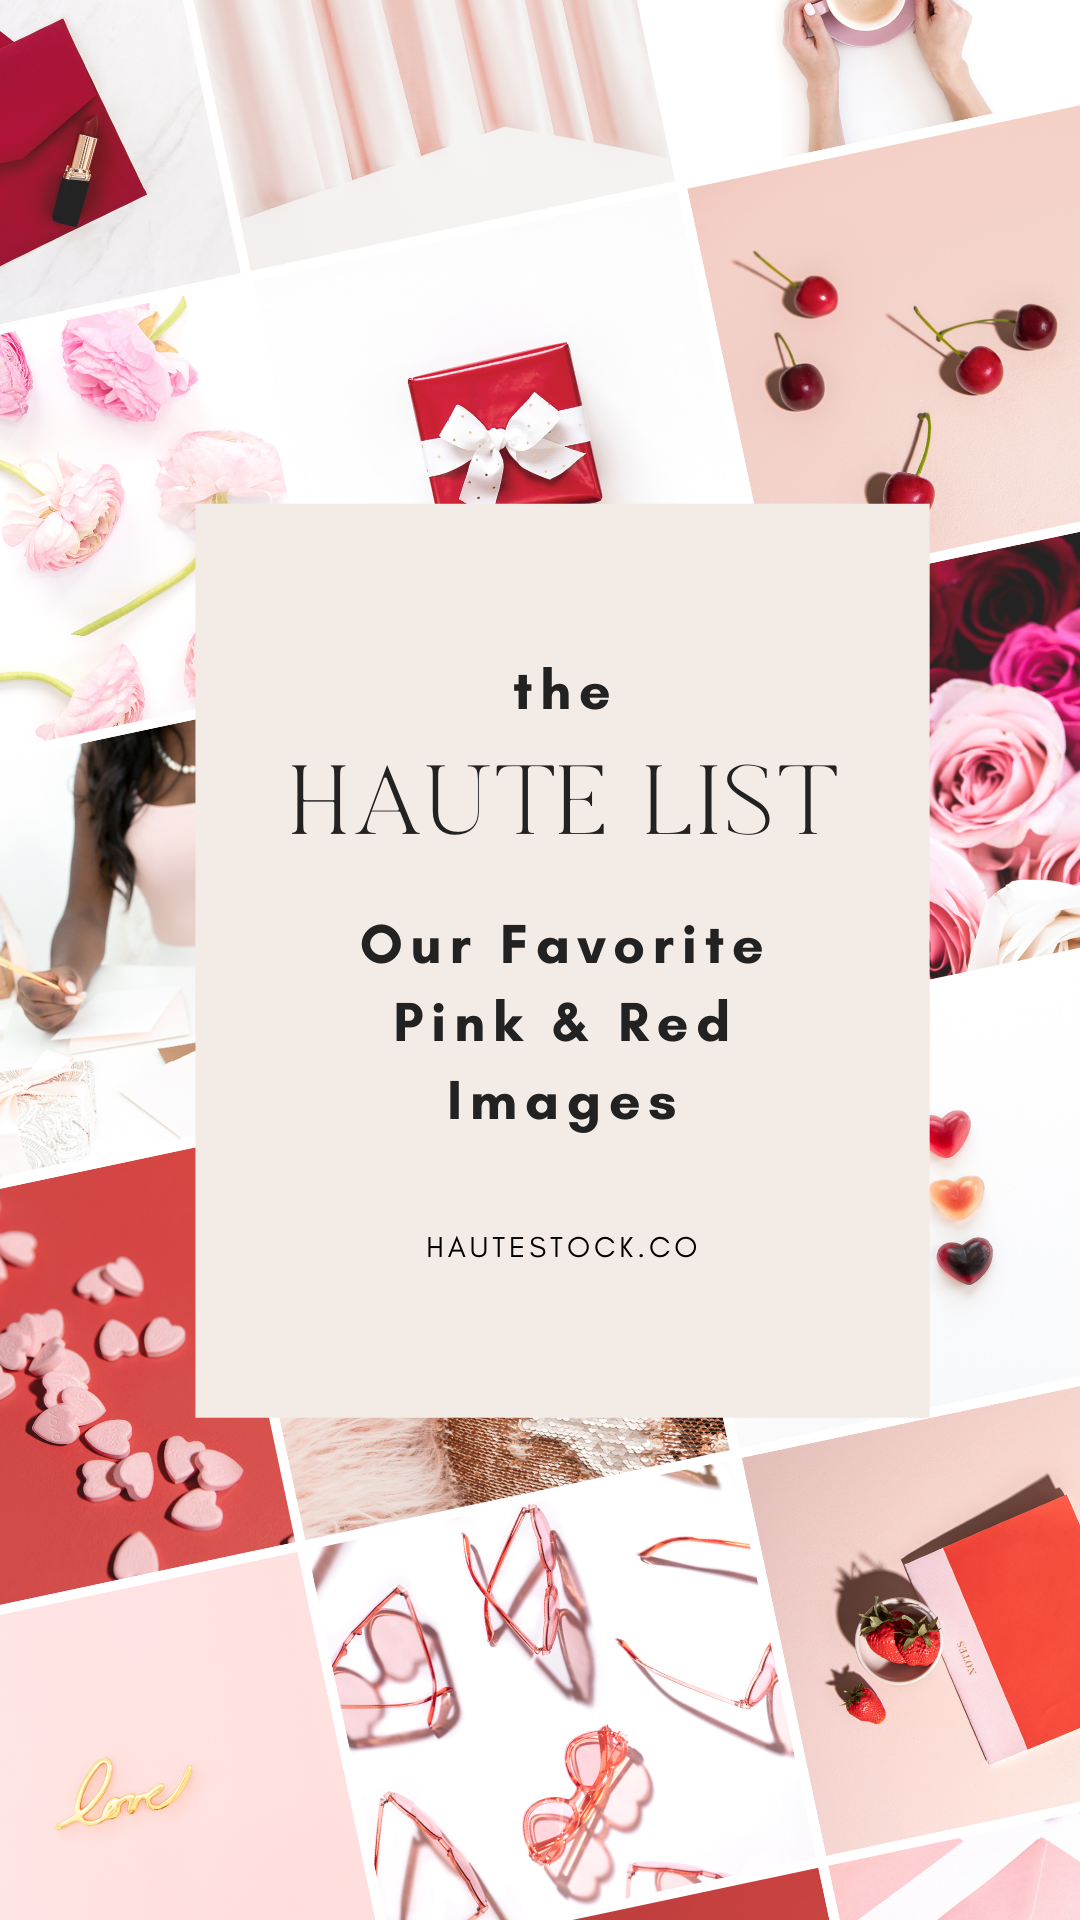 Pink and red styled stock photos for your Valentine's Day posts on Instagram of for Valentine's Day sales graphics. Available exclusively from Haute Stock.